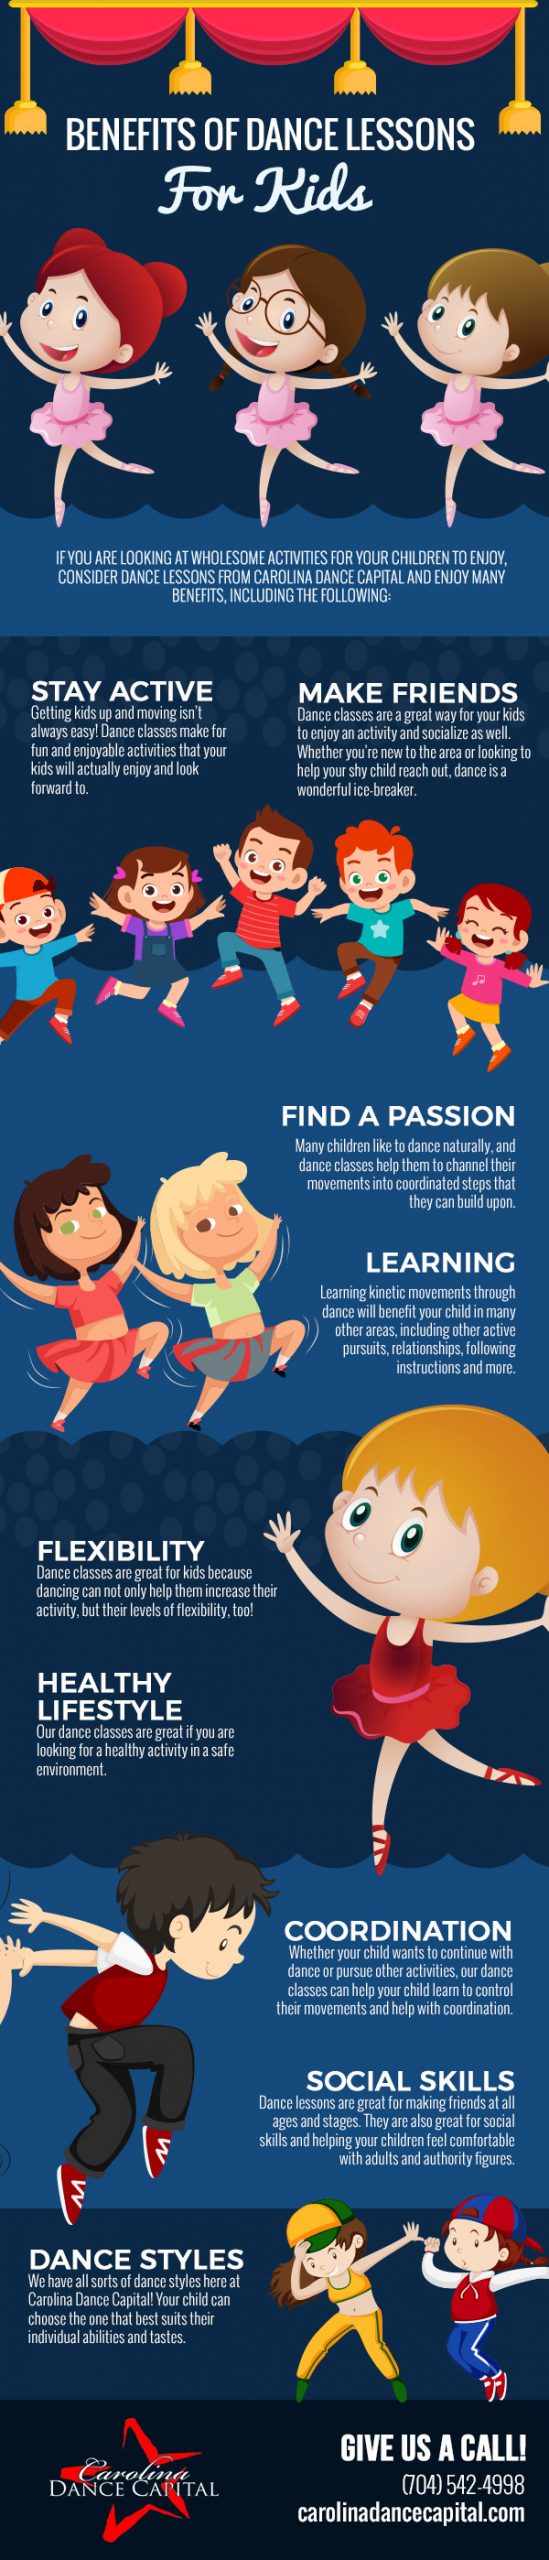 Benefits of Dance Lessons for Kids [infographic]